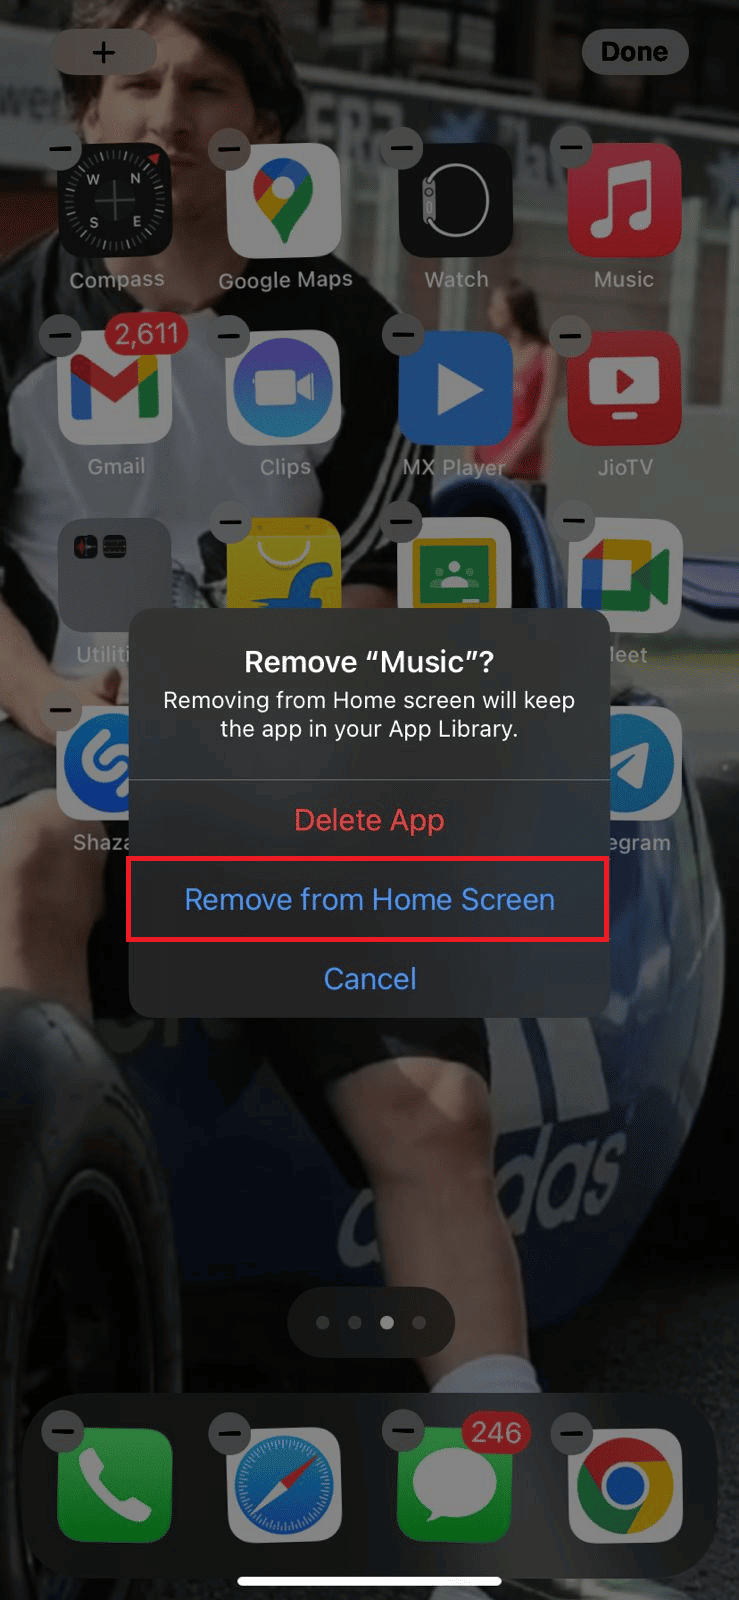 Tap on Remove from Home Screen